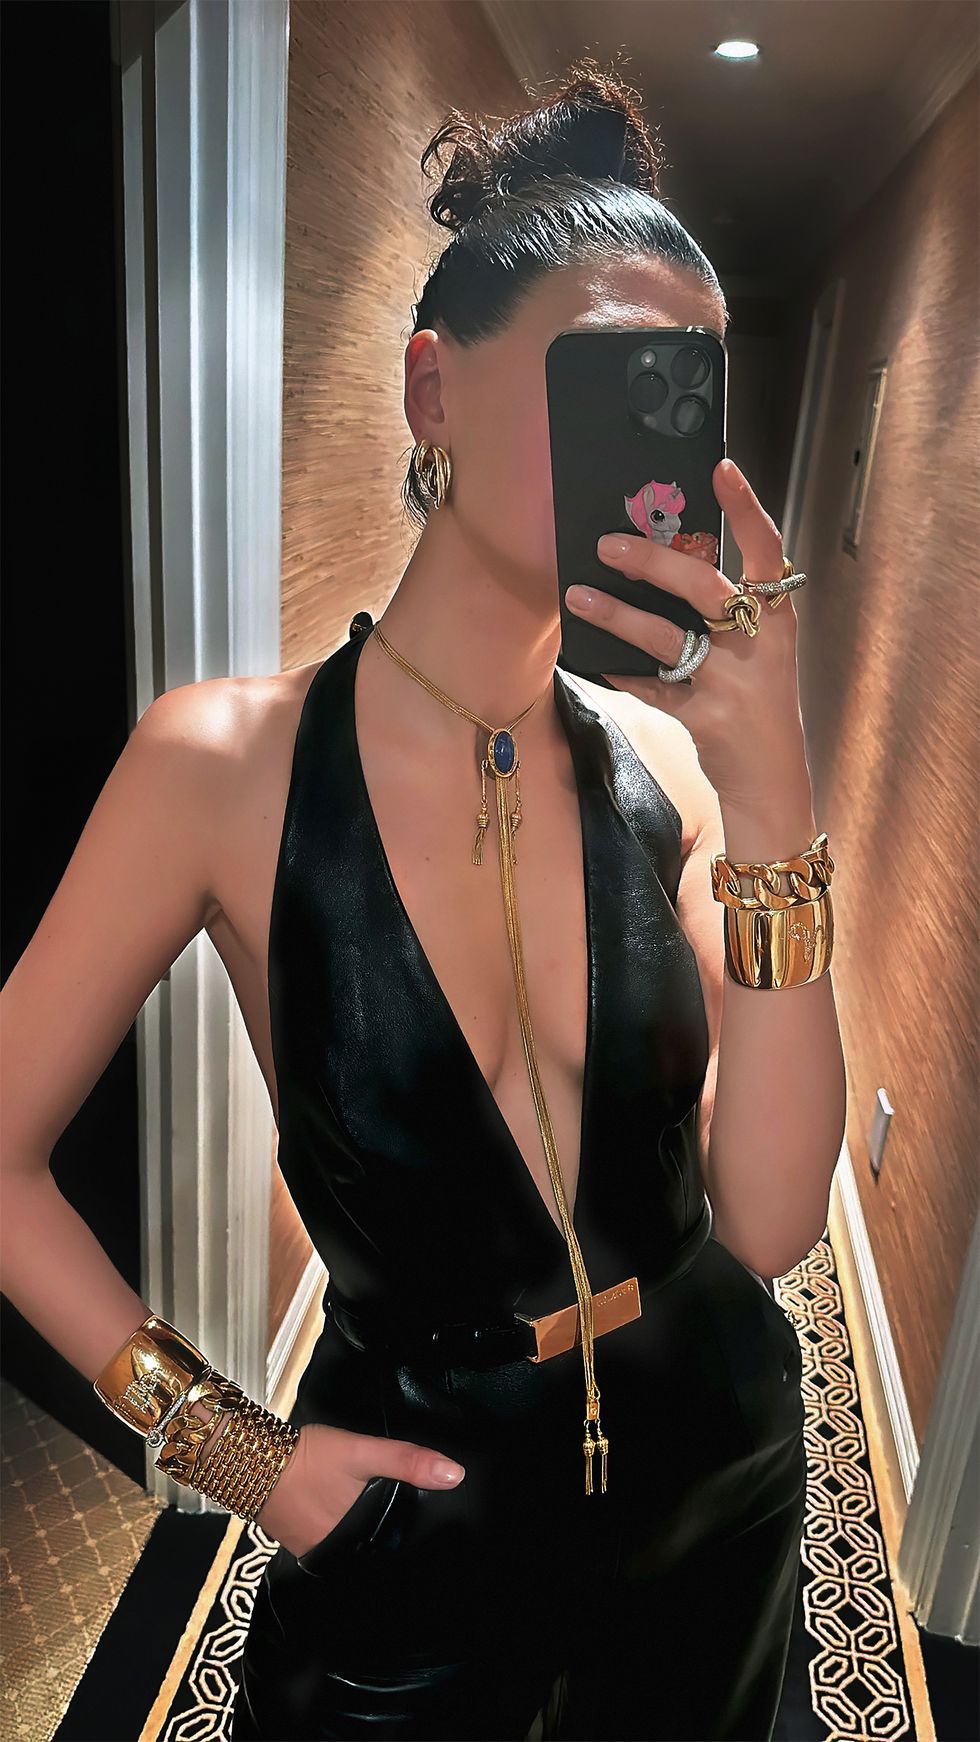 giovanna engelbert selfie with gold necklaces and cuffs